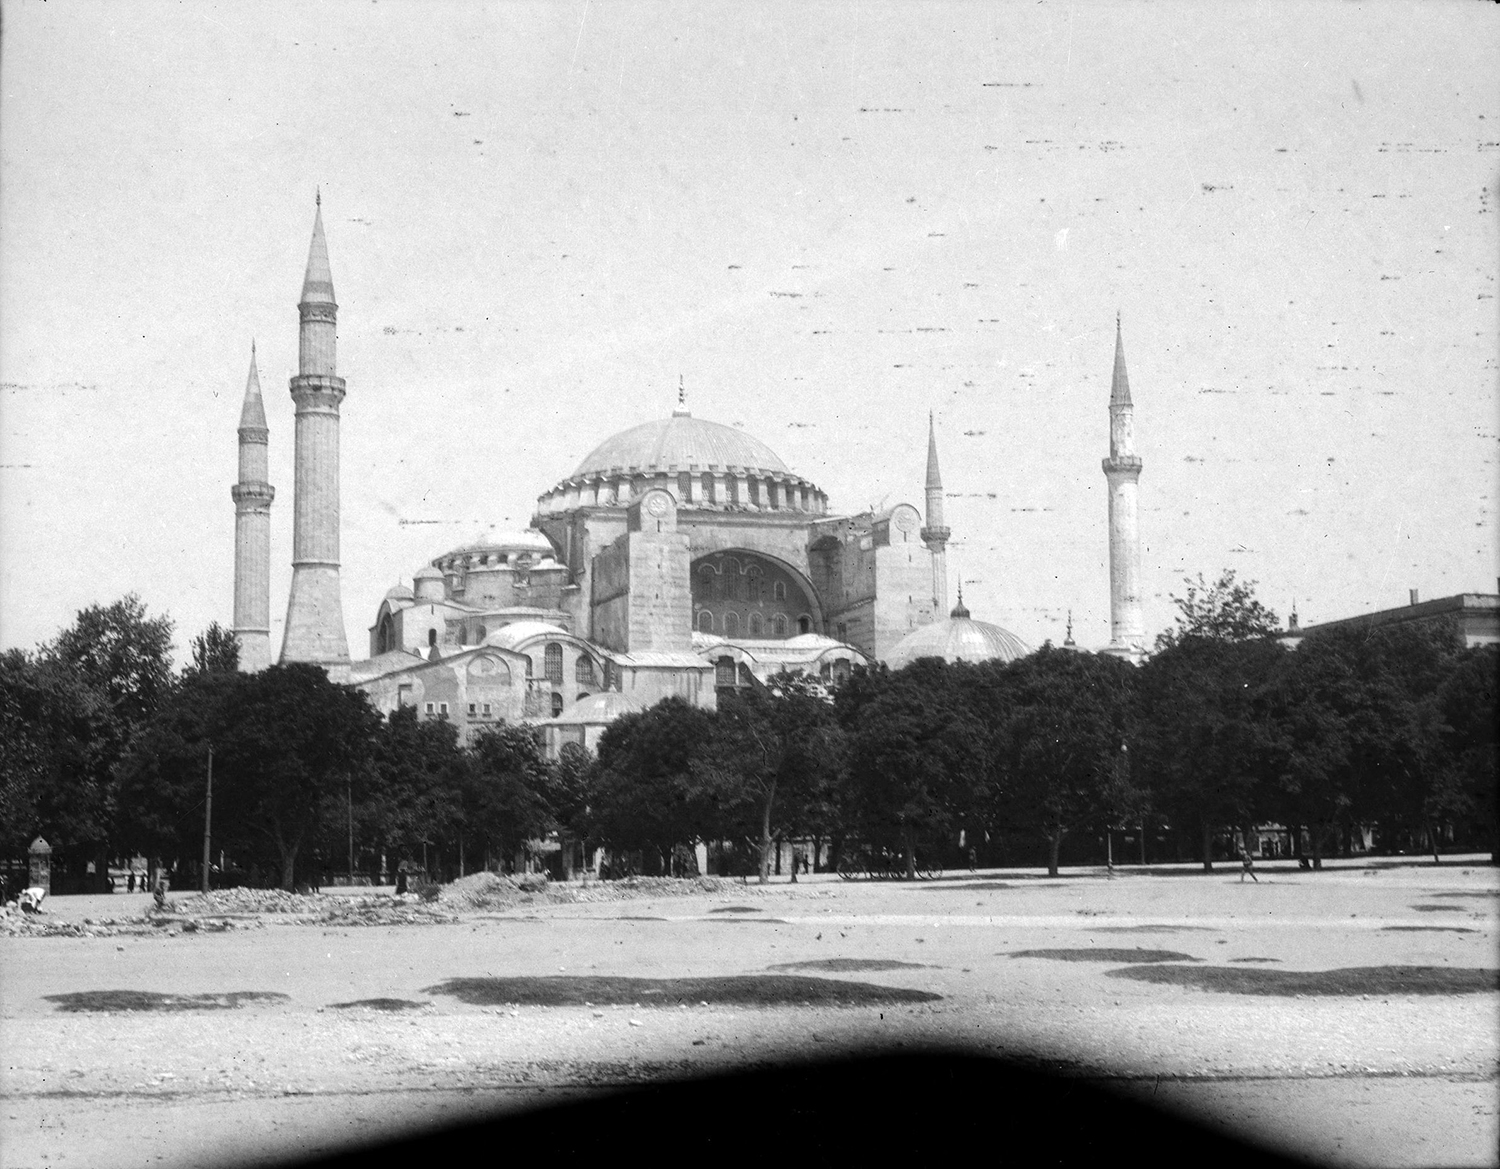 View looking to the Hagia Sophia